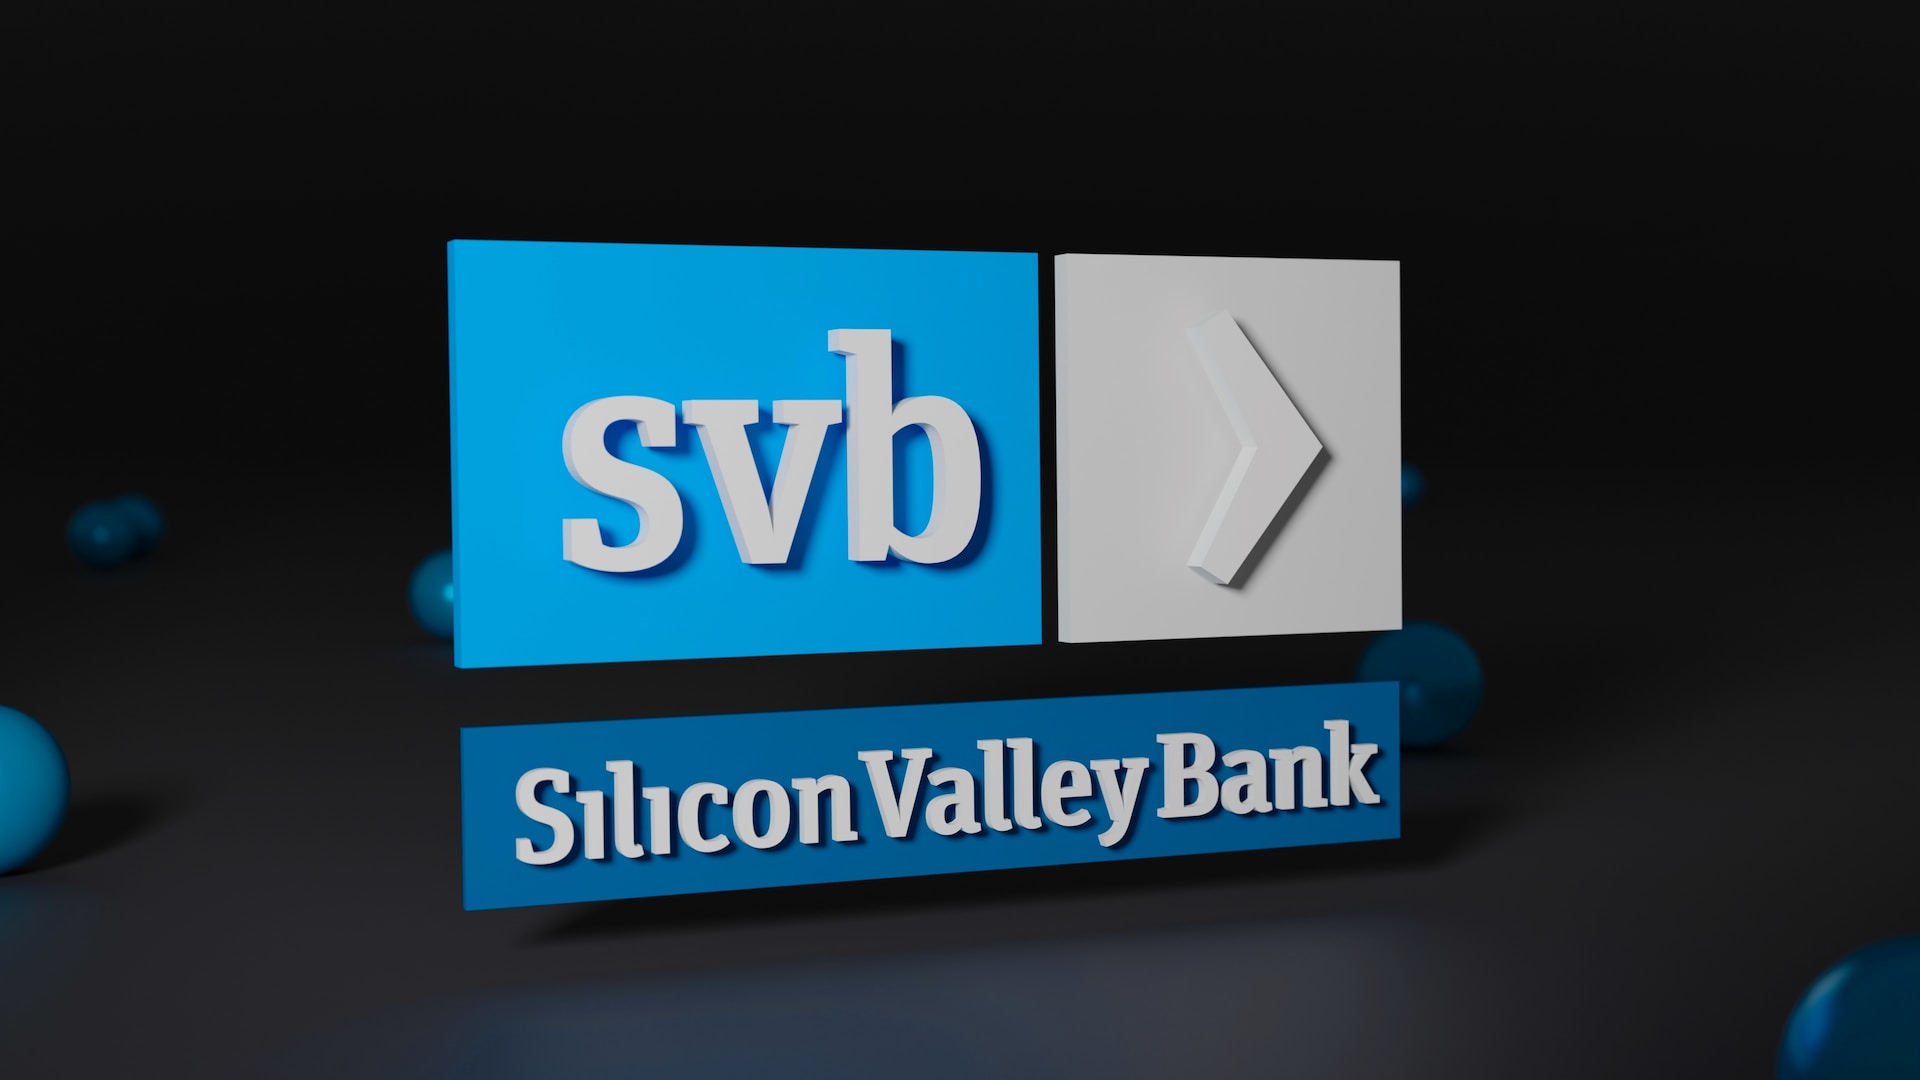 Lessons from the Silicon Valley Bank Collapse